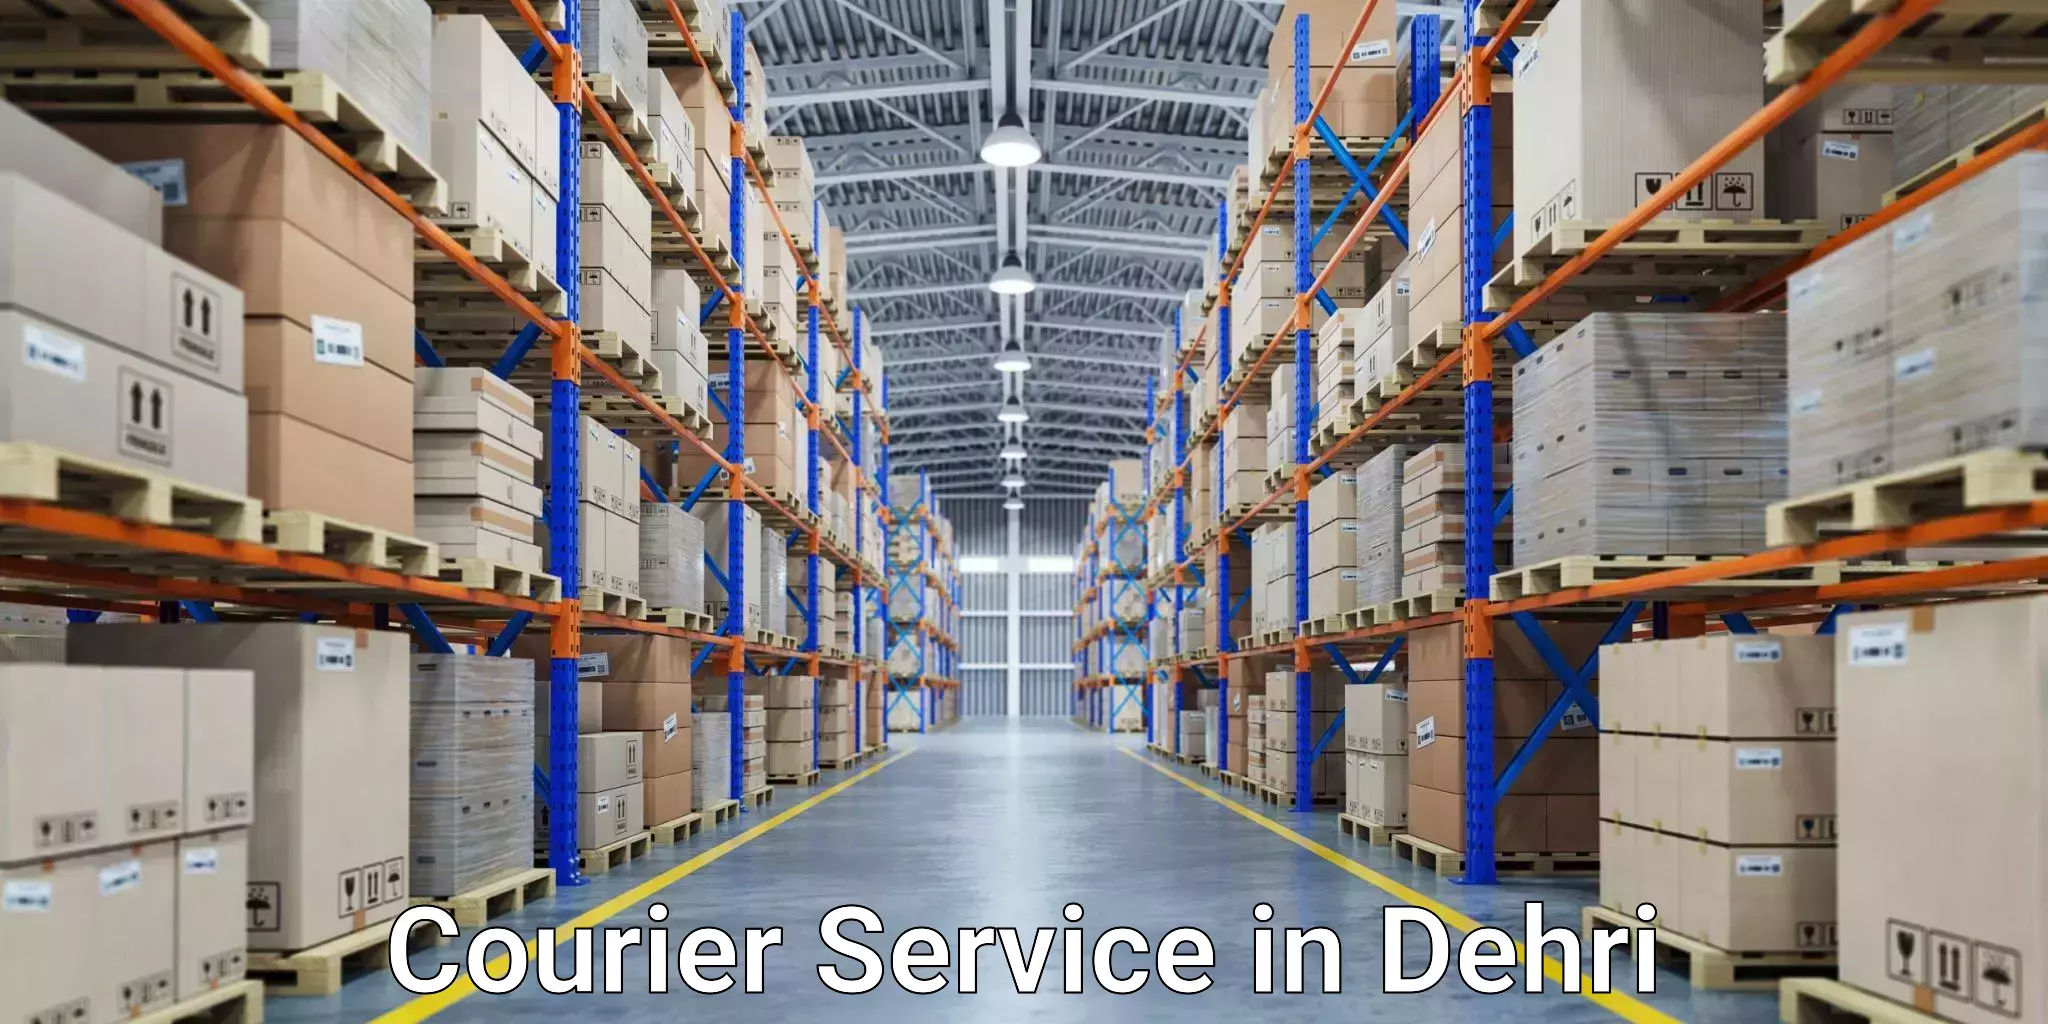 Rapid shipping services in Dehri